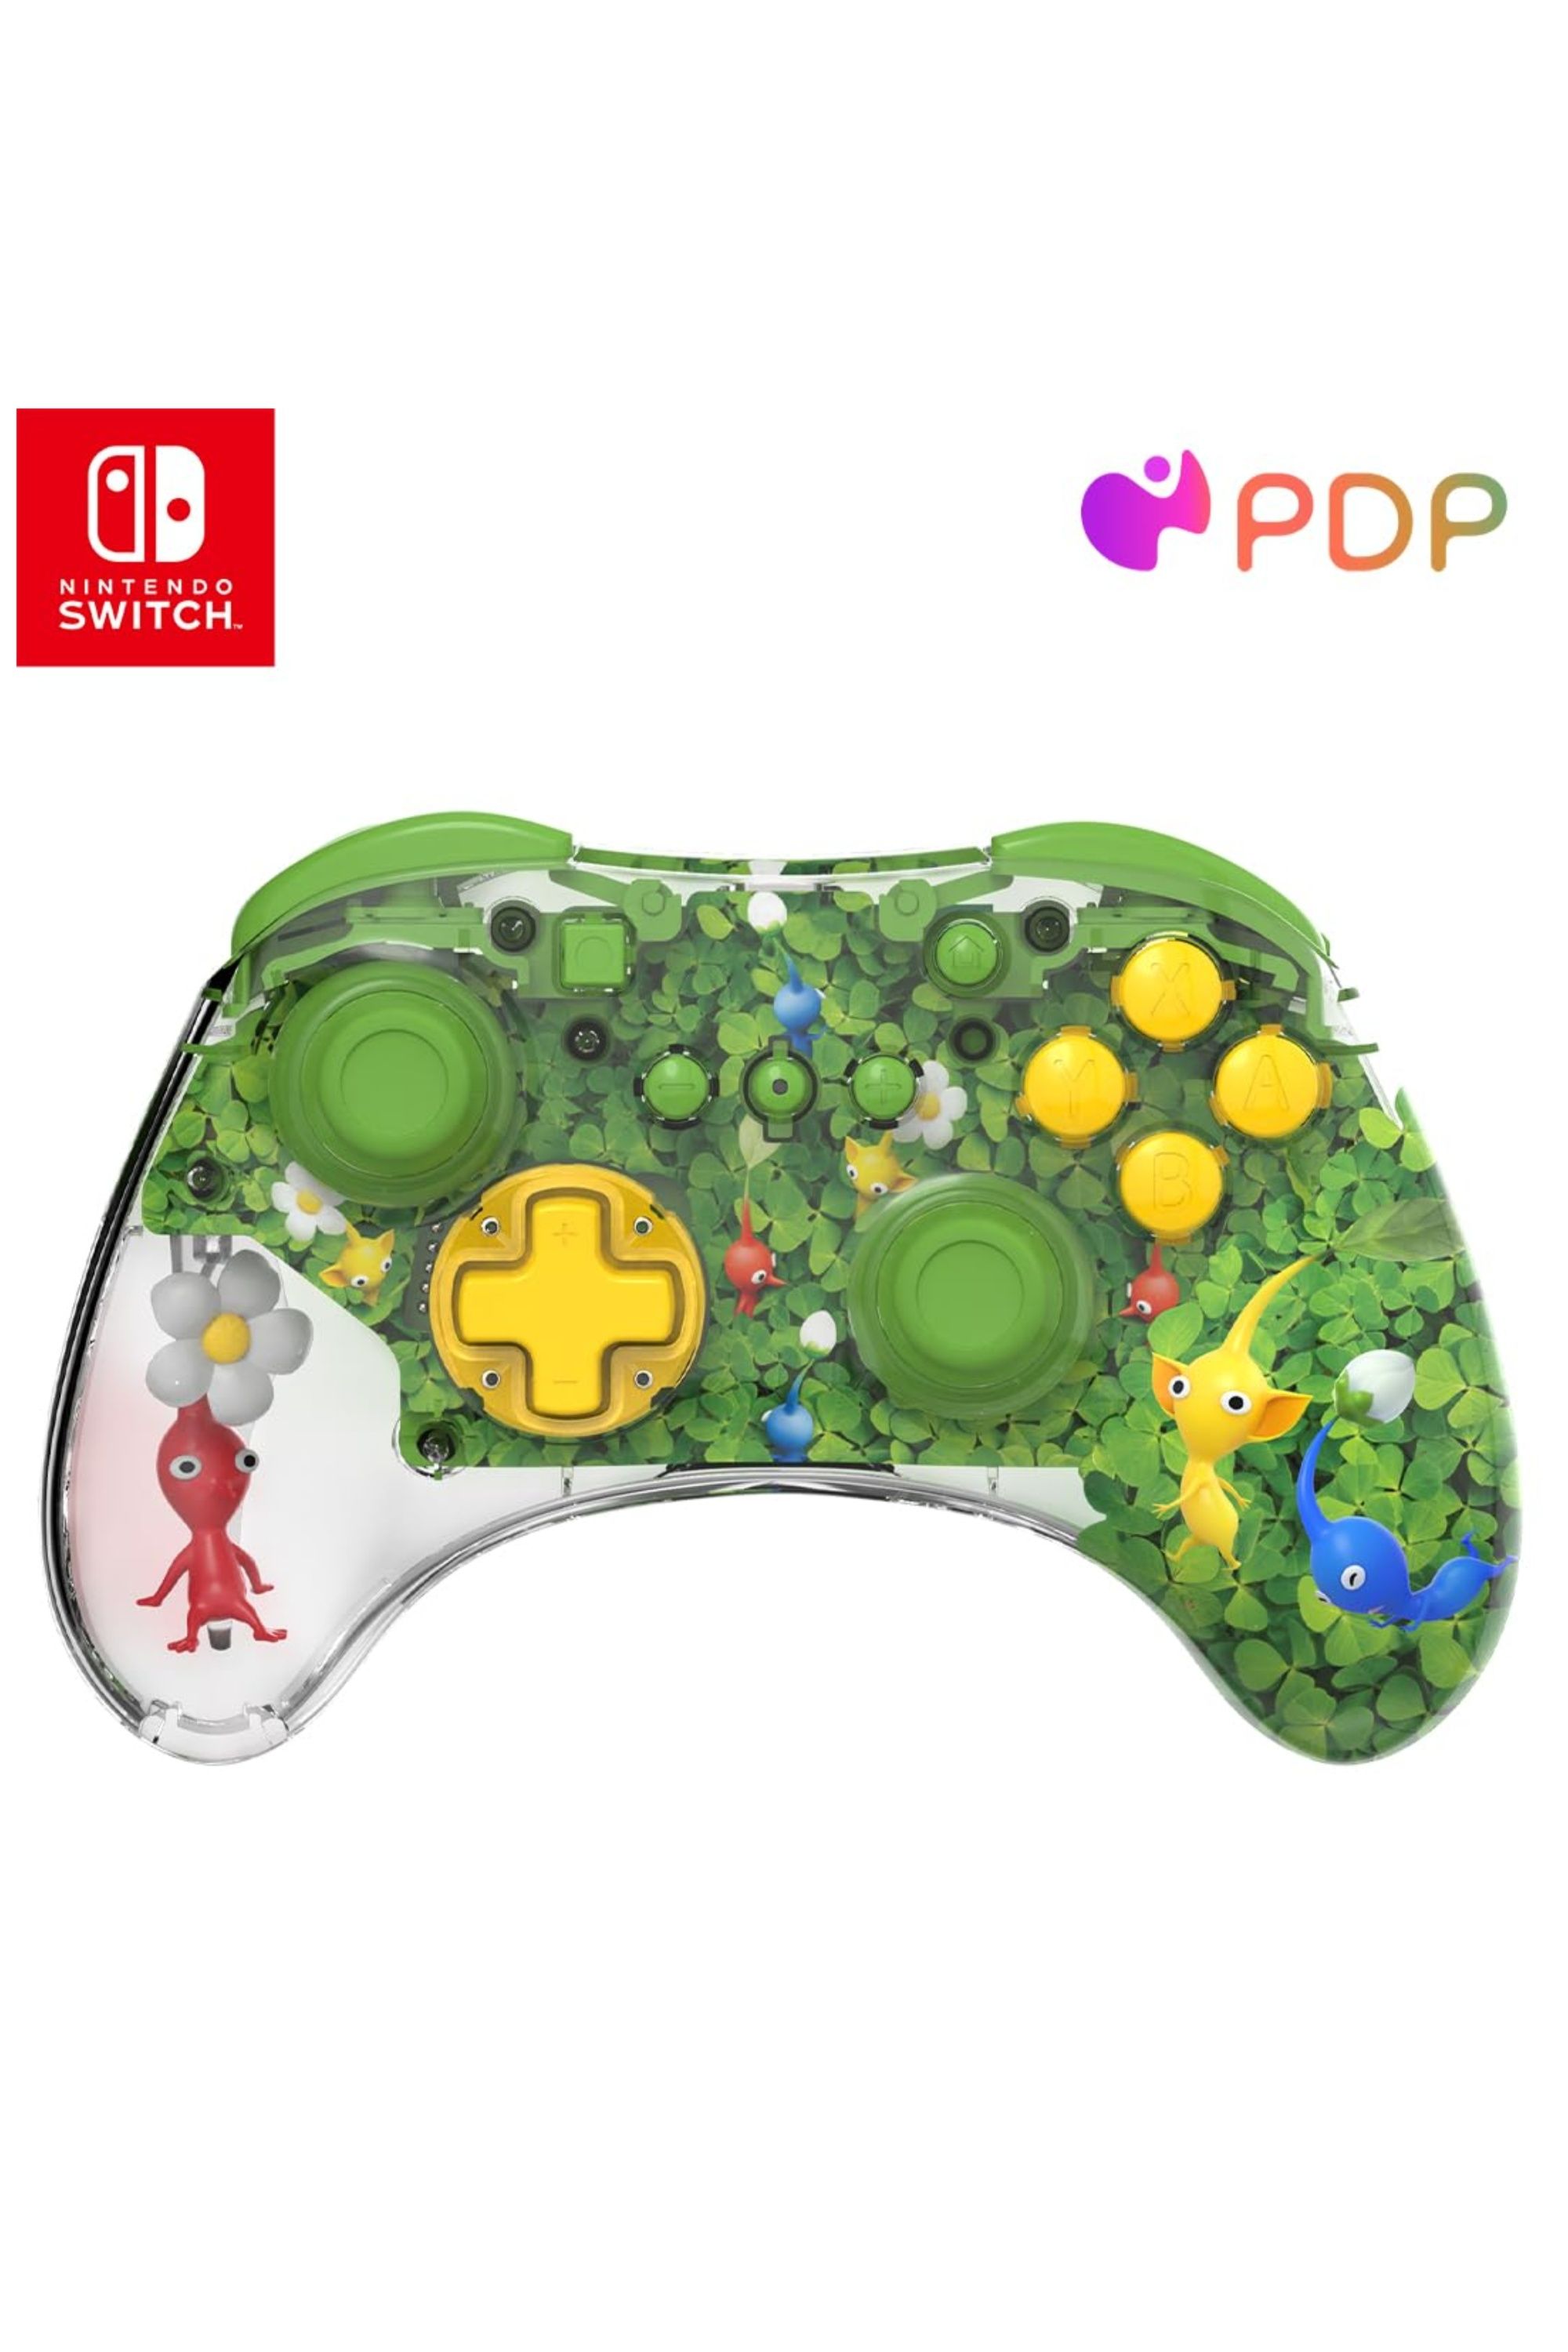 pdp realmz pikmin clover patch nintendo switch controller